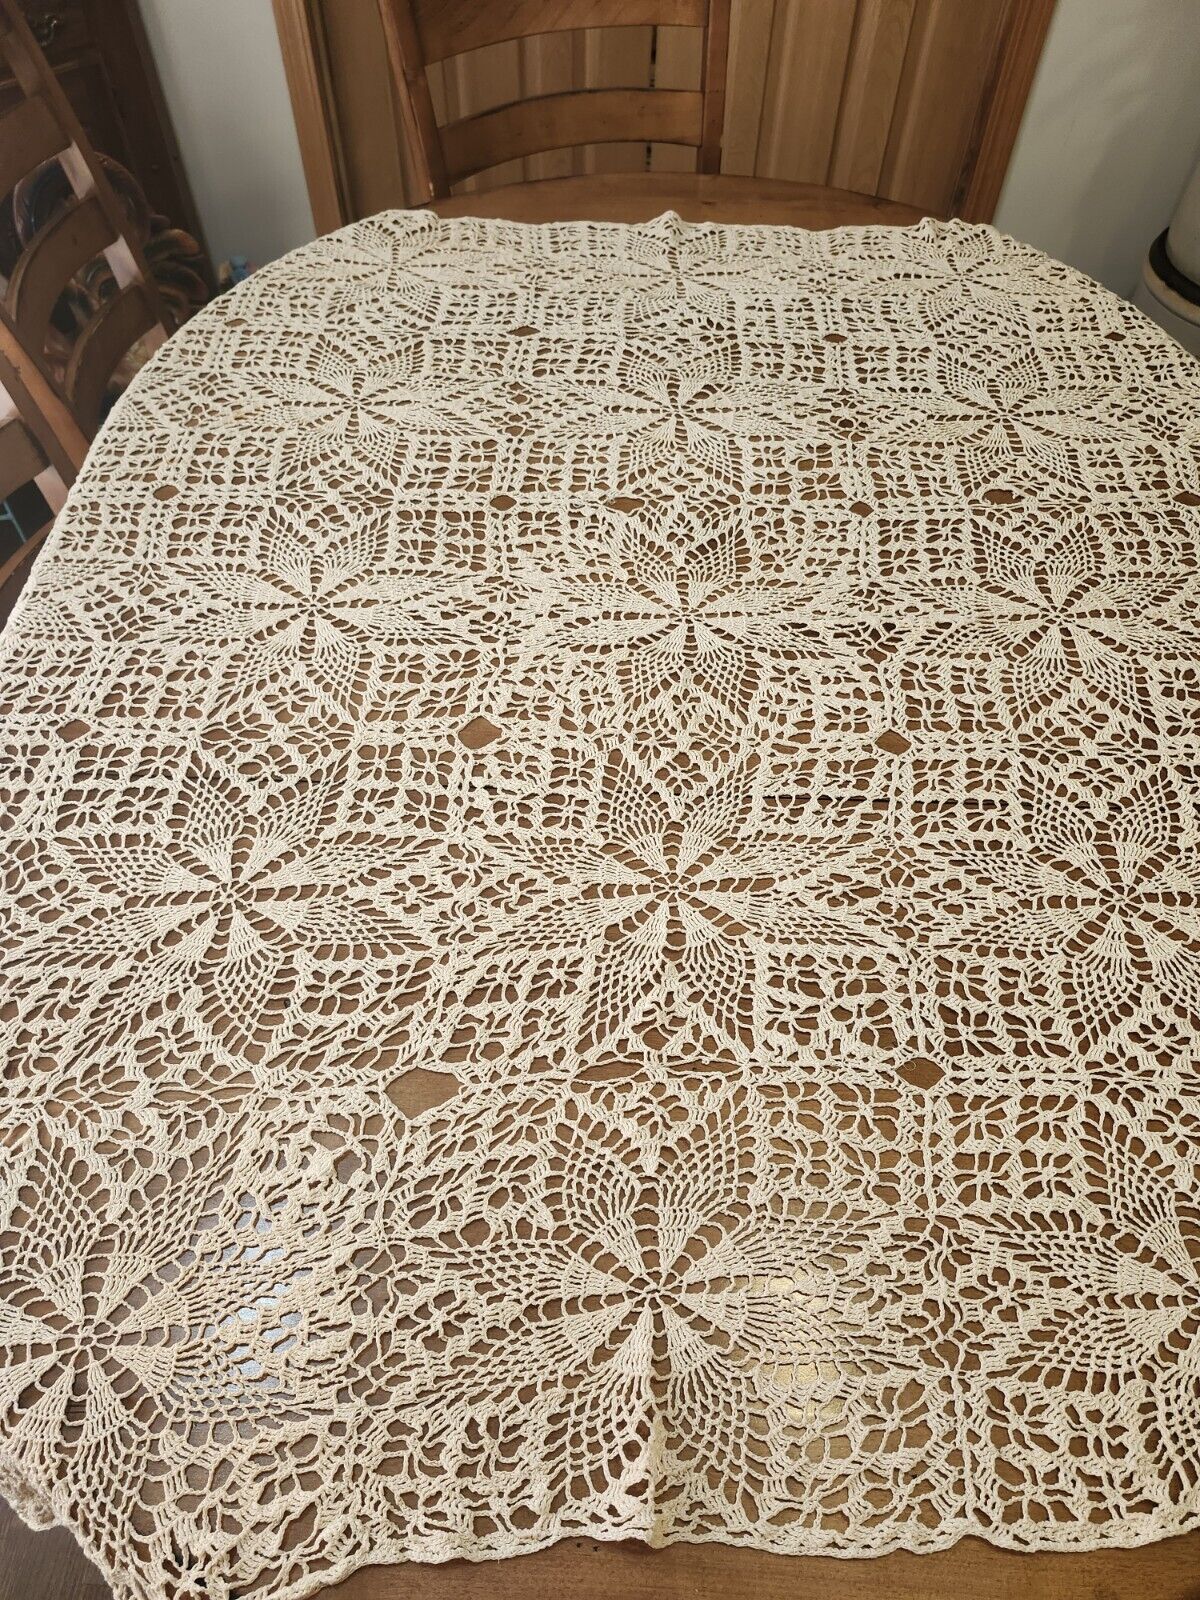 Vintage Crochet Off-Squared Tablecloth Or Buffet Or Trunk Throw Or Scarf